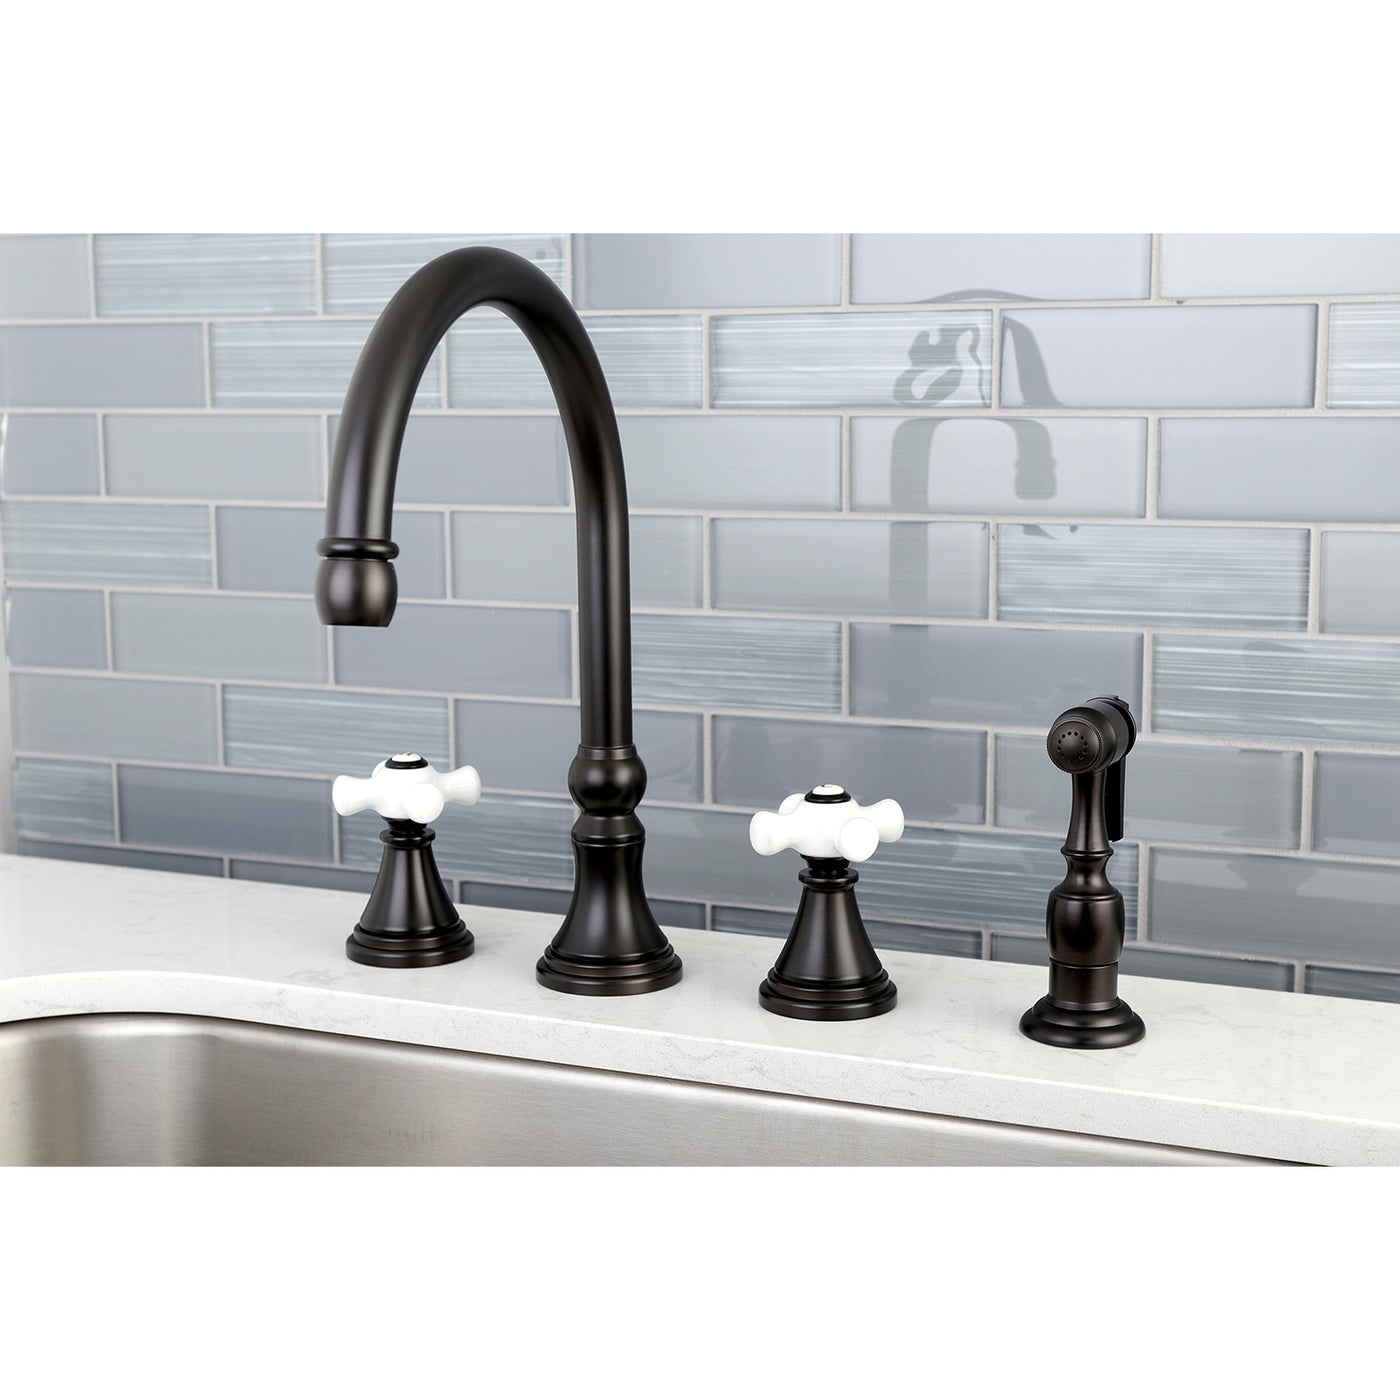 Elements of Design ES2795PXBS Widespread Kitchen Faucet with Brass Sprayer, Oil Rubbed Bronze